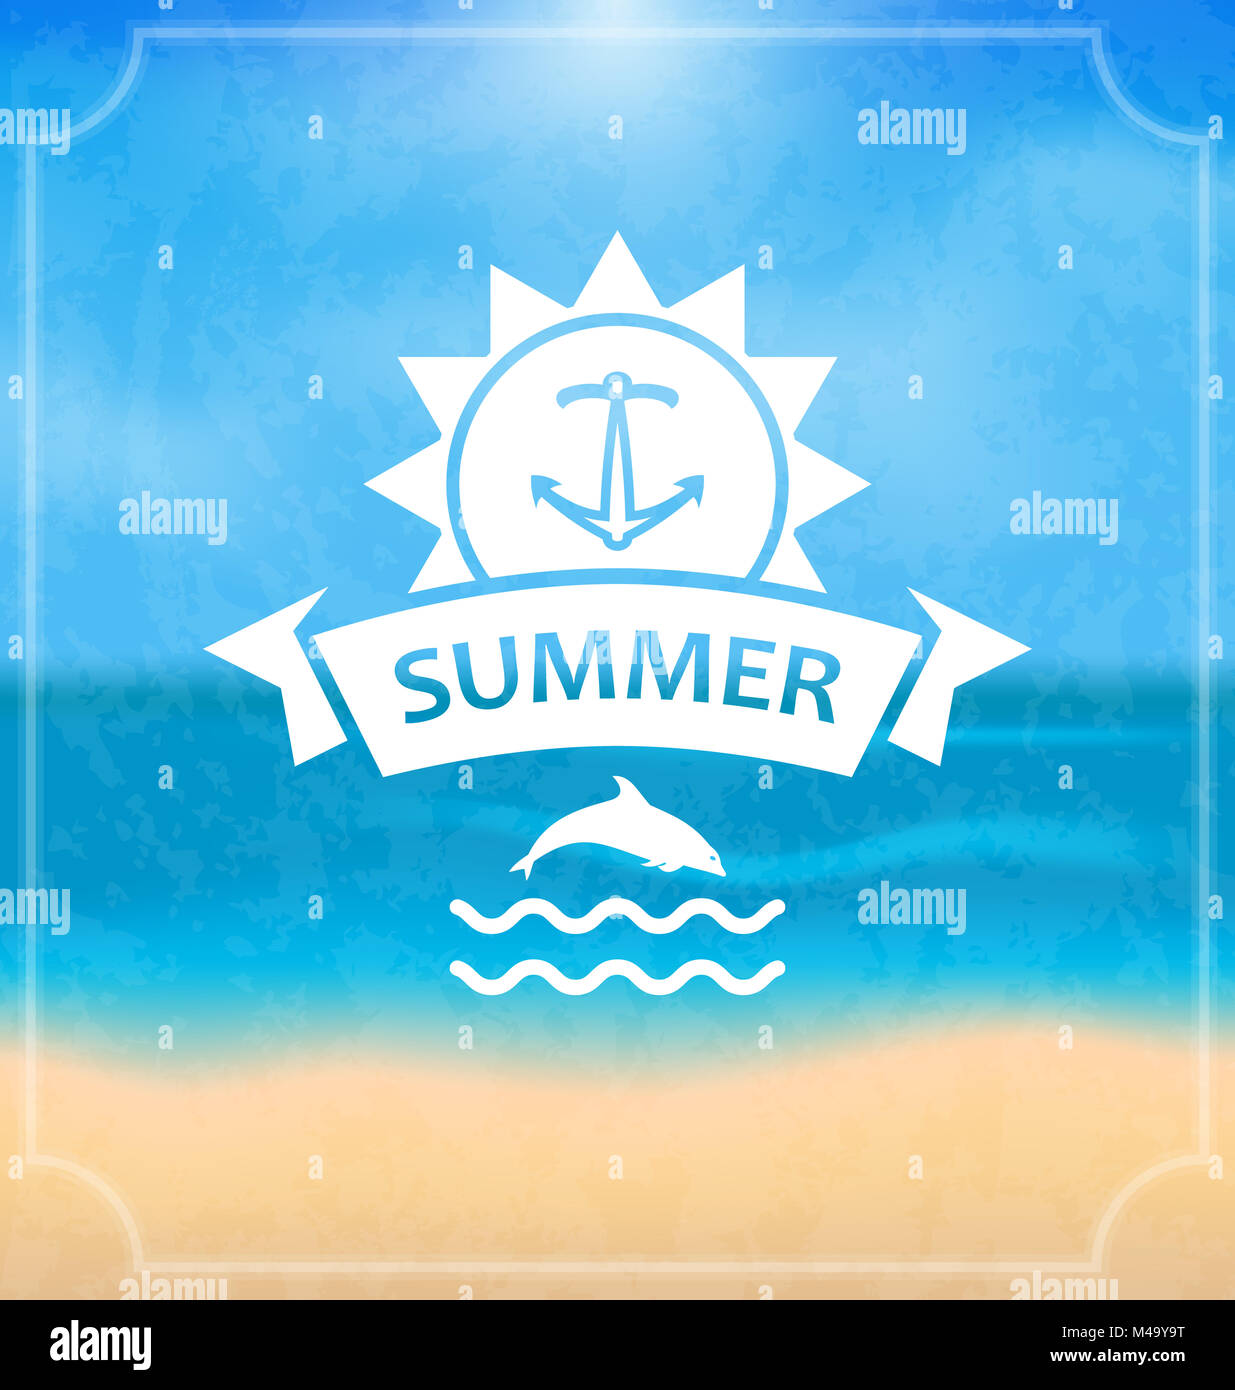 Summer Template of Holidays Design and Typography Stock Photo